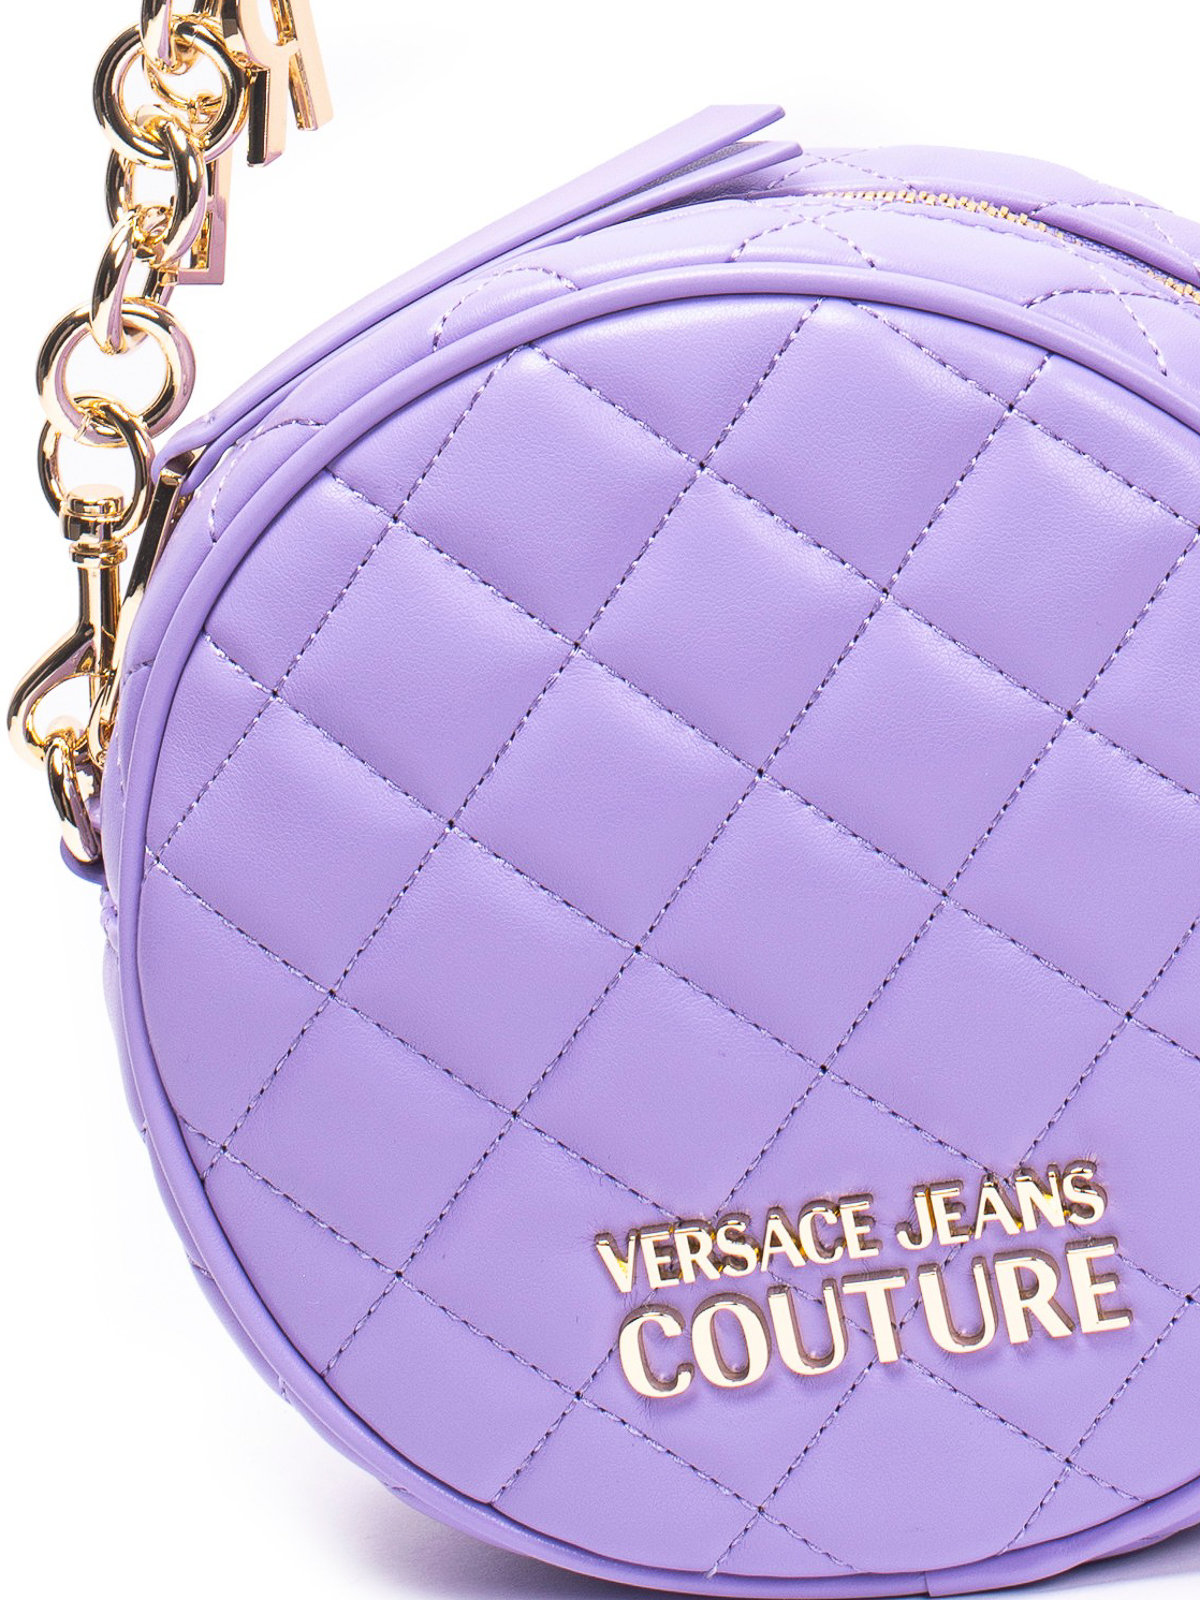 VERSACE JEANS COUTURE ハンドバッグ ライラック メタリック